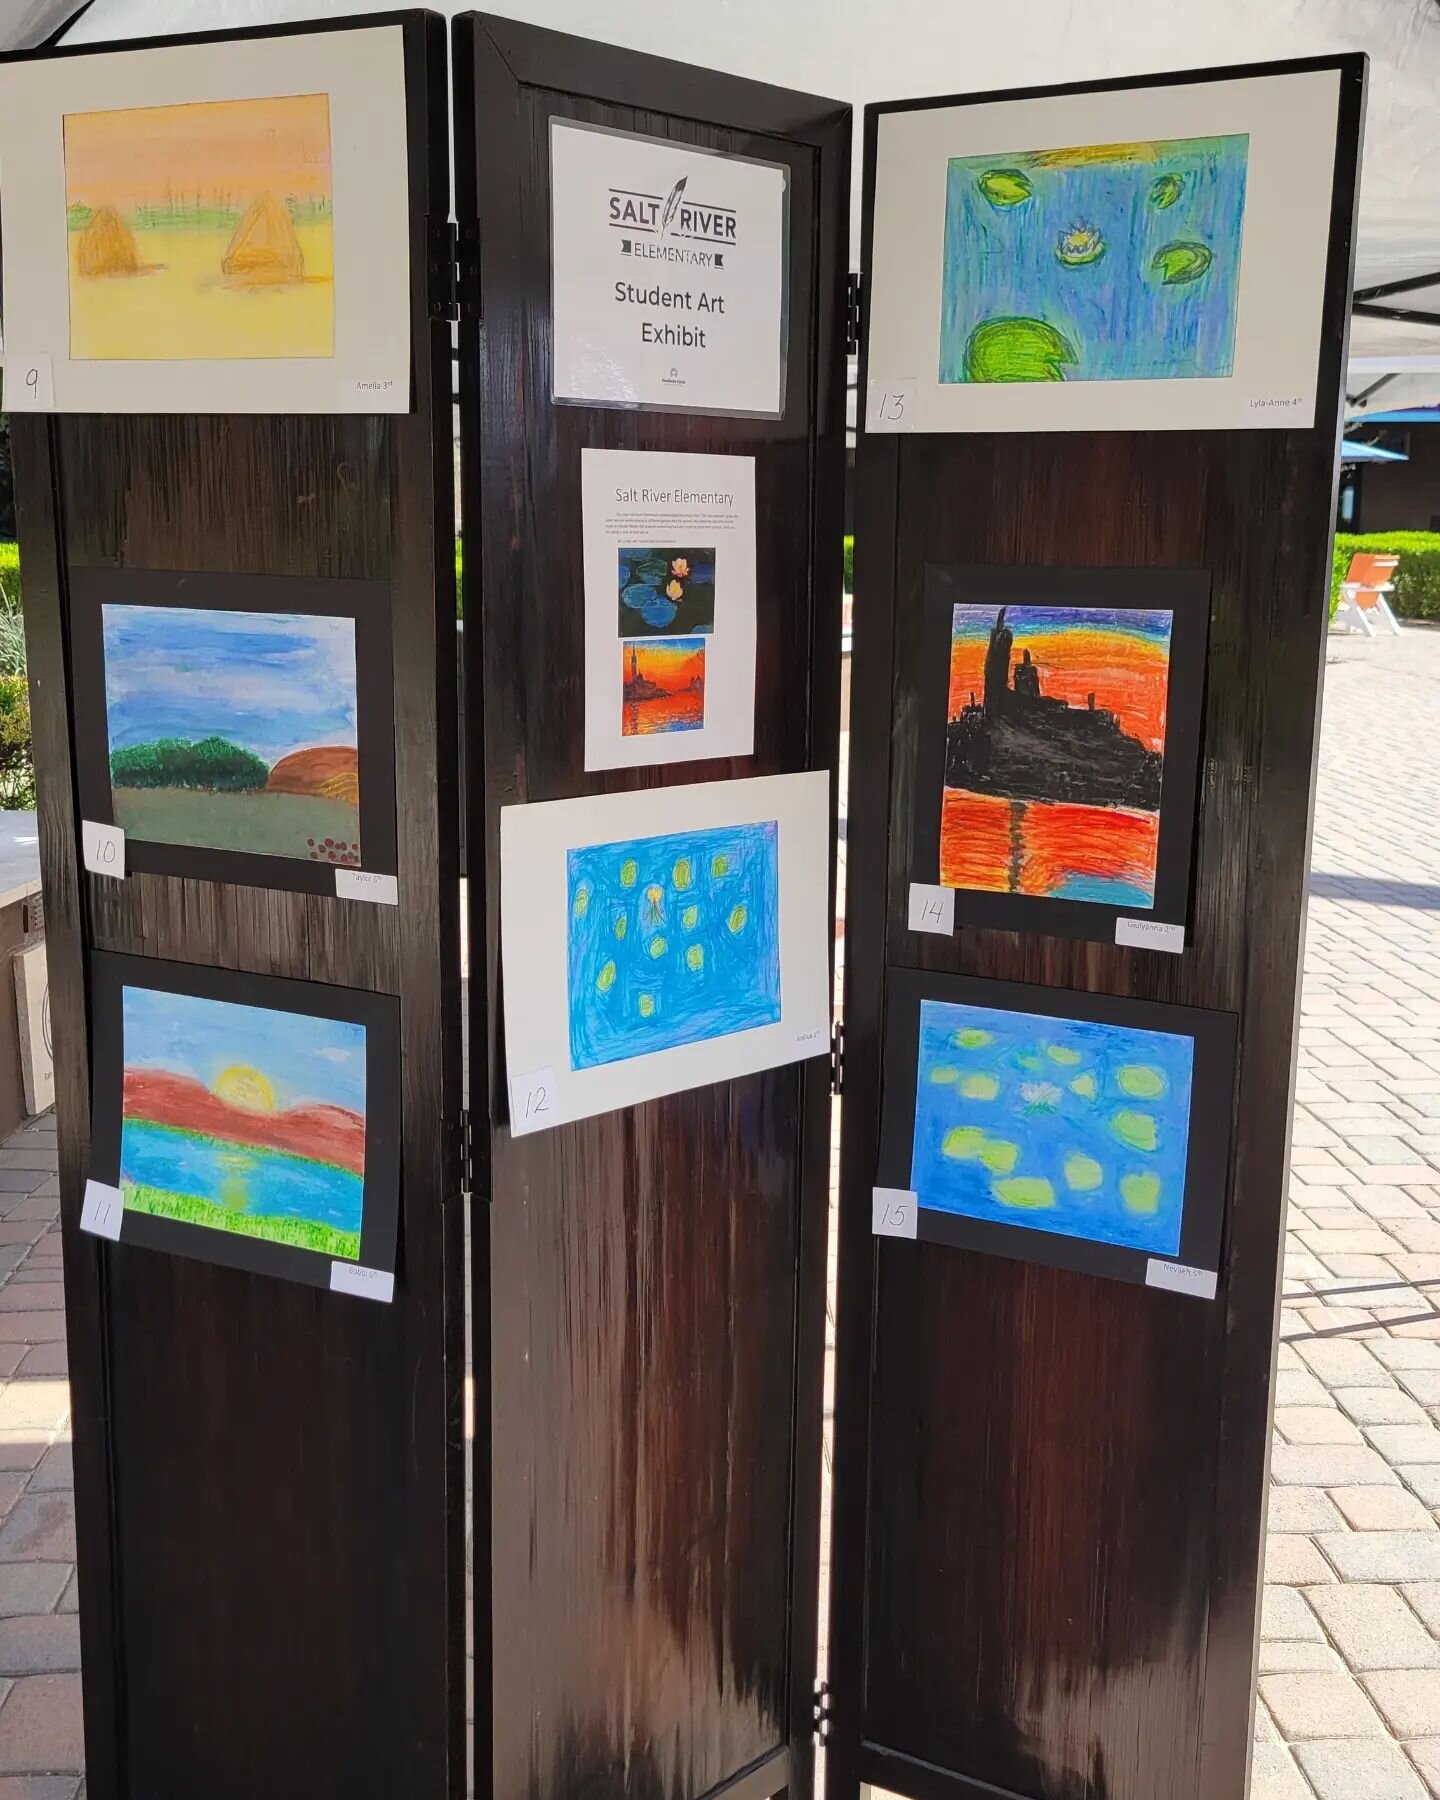 Come vote for your favorite student artist. 
The students at @saltriverschools studied the works of Claude Monet and created their own interpretations.

Spring Art on the Boardwalk .
10am-5pm 
9500 E. Via de Ventura, Scottsdale 

More info: sundancec